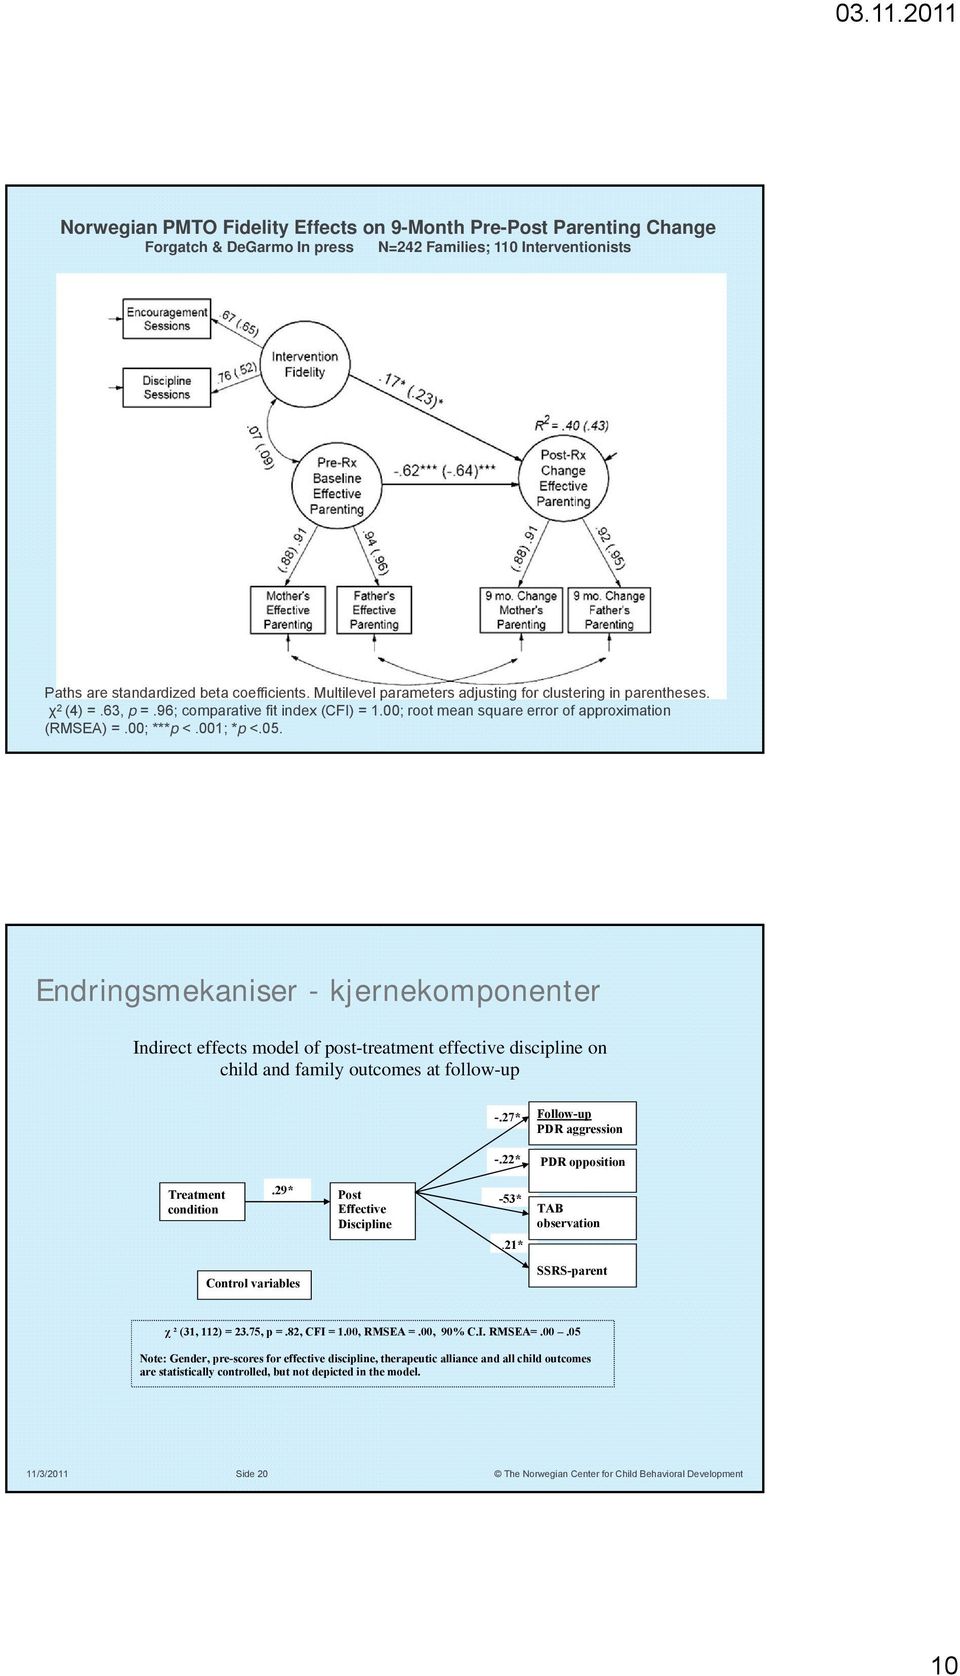 Endringsmekaniser - kjernekomponenter Indirect effects model of post-treatment effective discipline on child and family outcomes at follow-up -.27* Follow-up PDR aggression -.